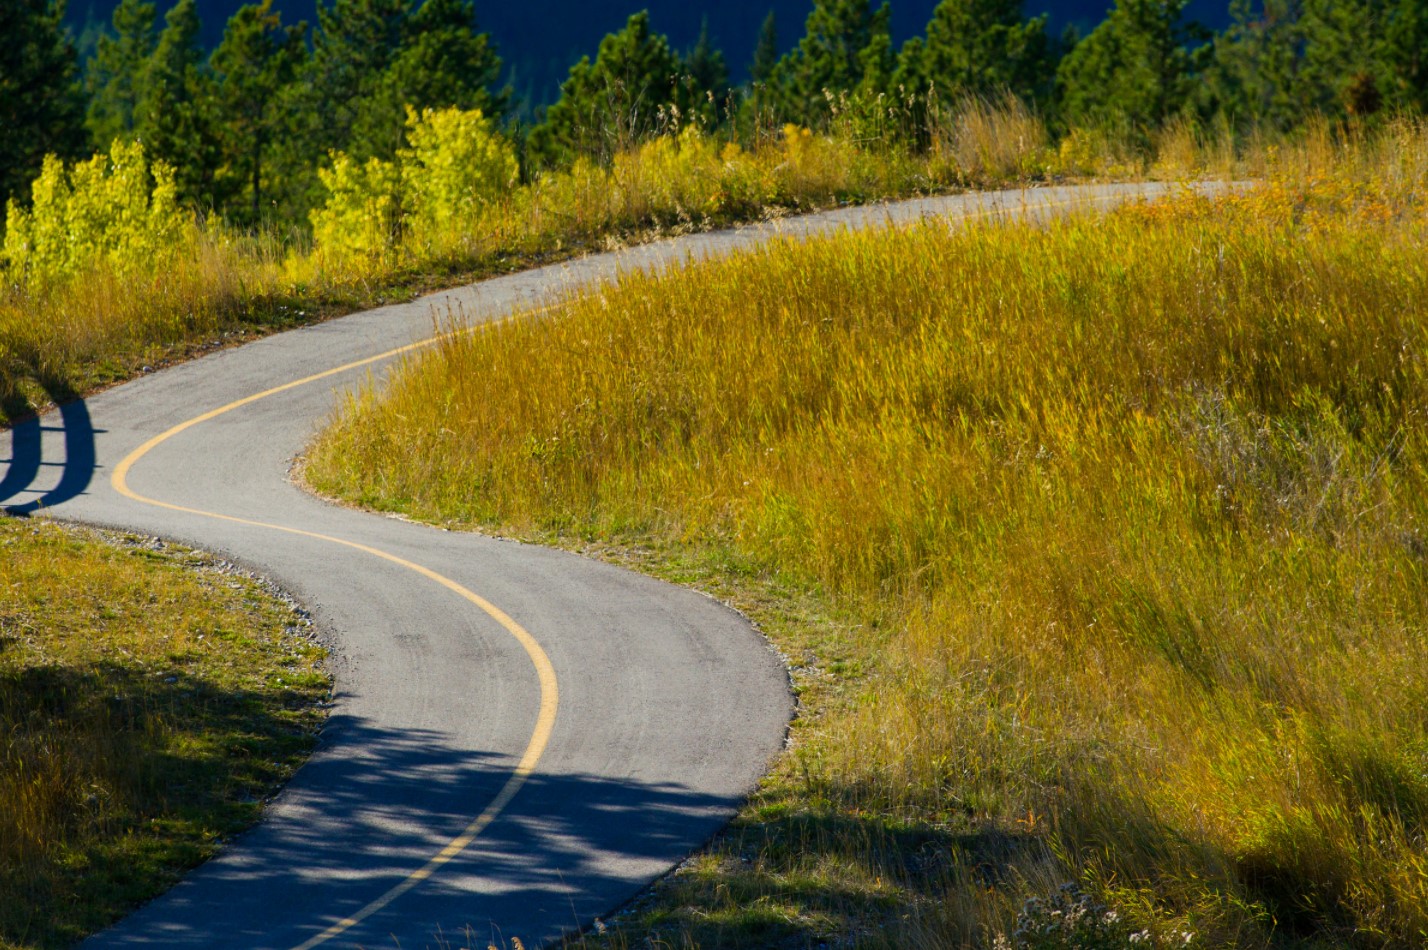 Creating Charitable Legacy While Ensuring Lifetime Income | Road winding through a meadow